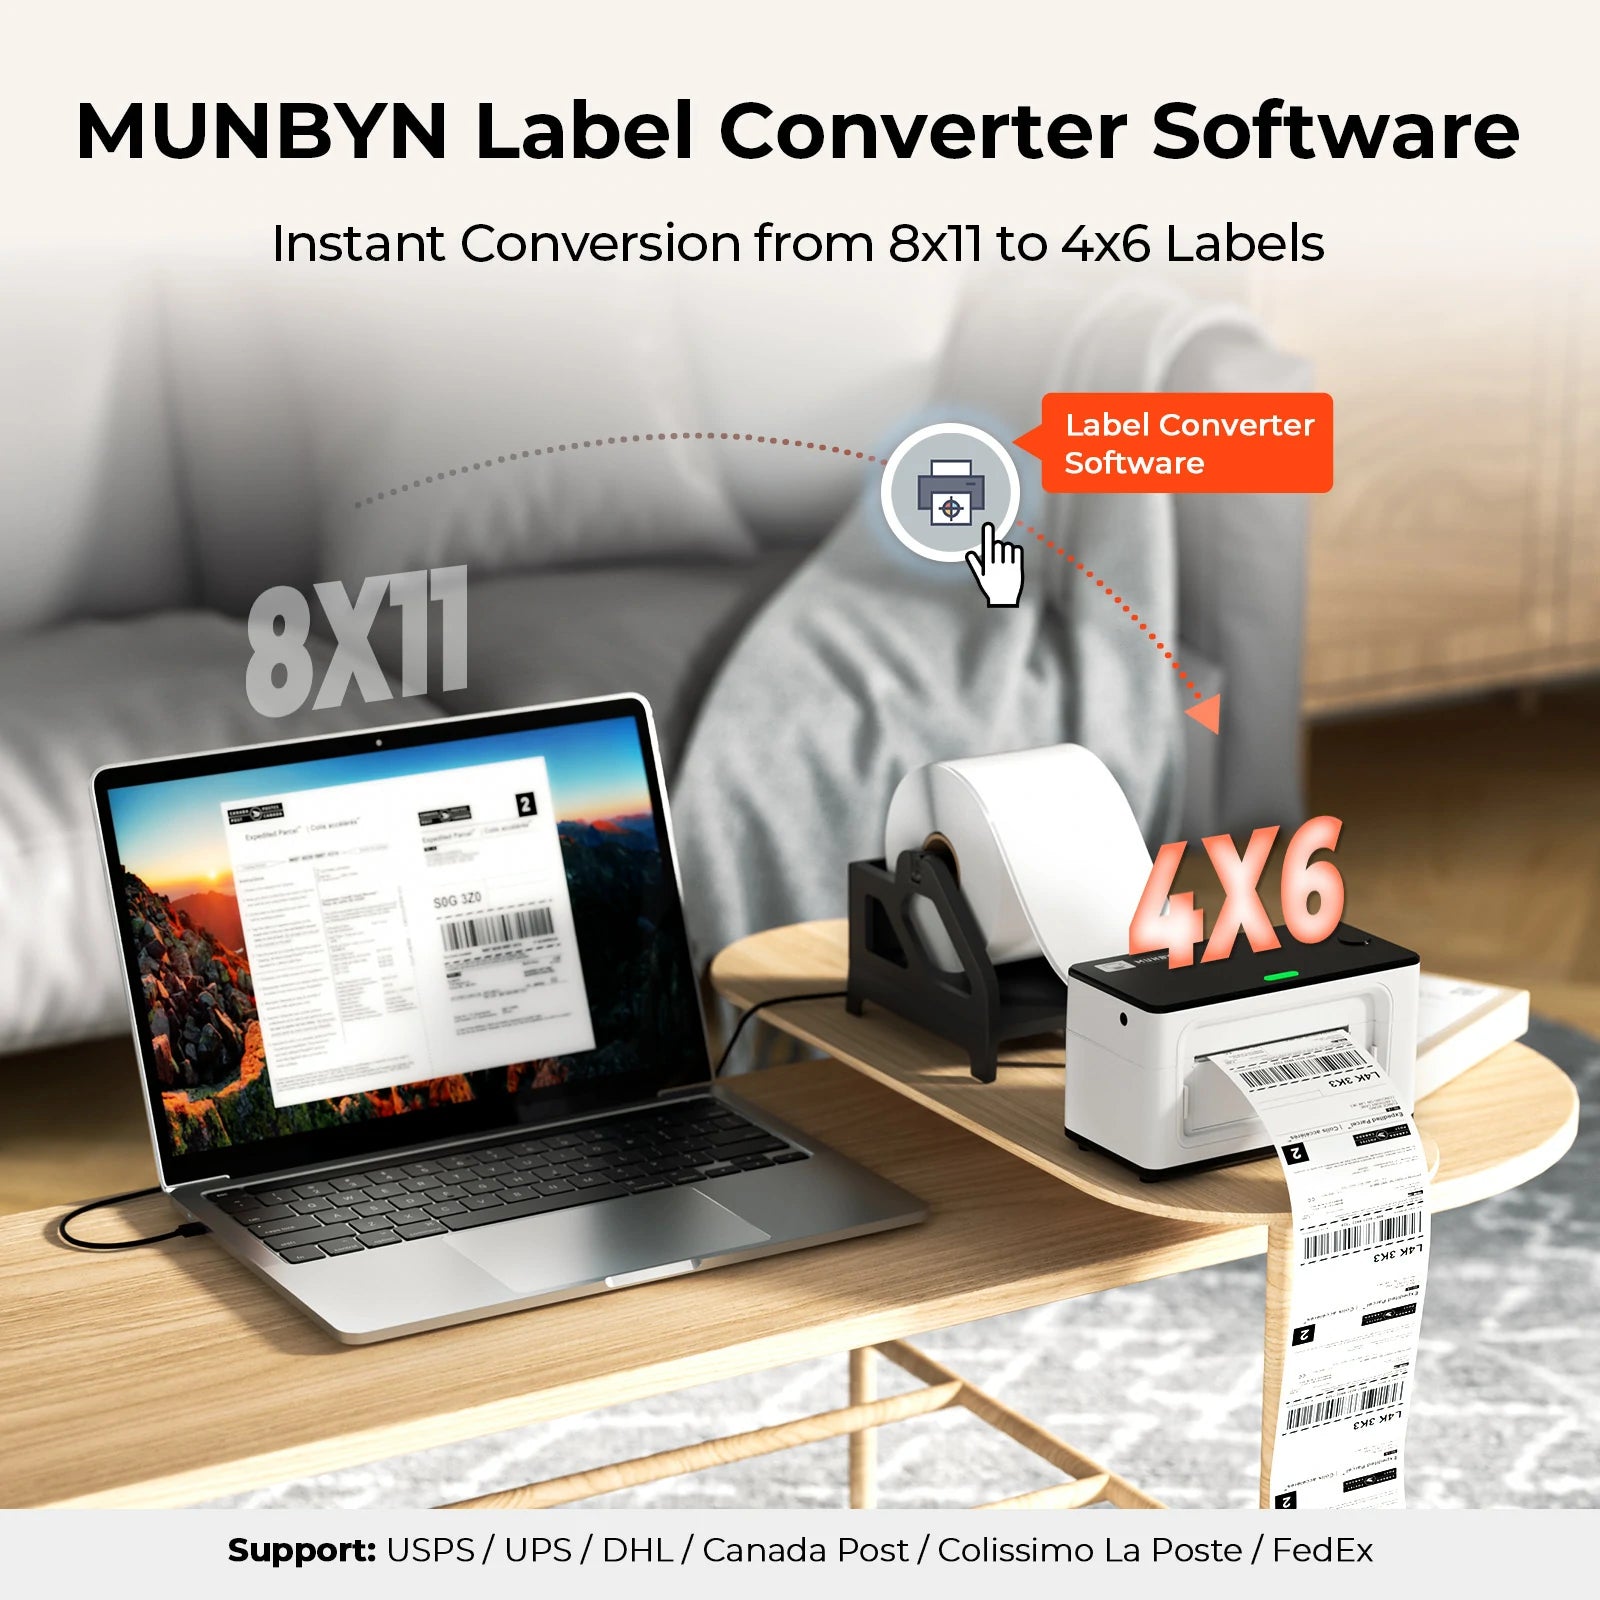 By using the MUNBYN Label Converter app, MUNBYN printers can convert and print 8.5x11-inch labels into 4x6-inch labels.